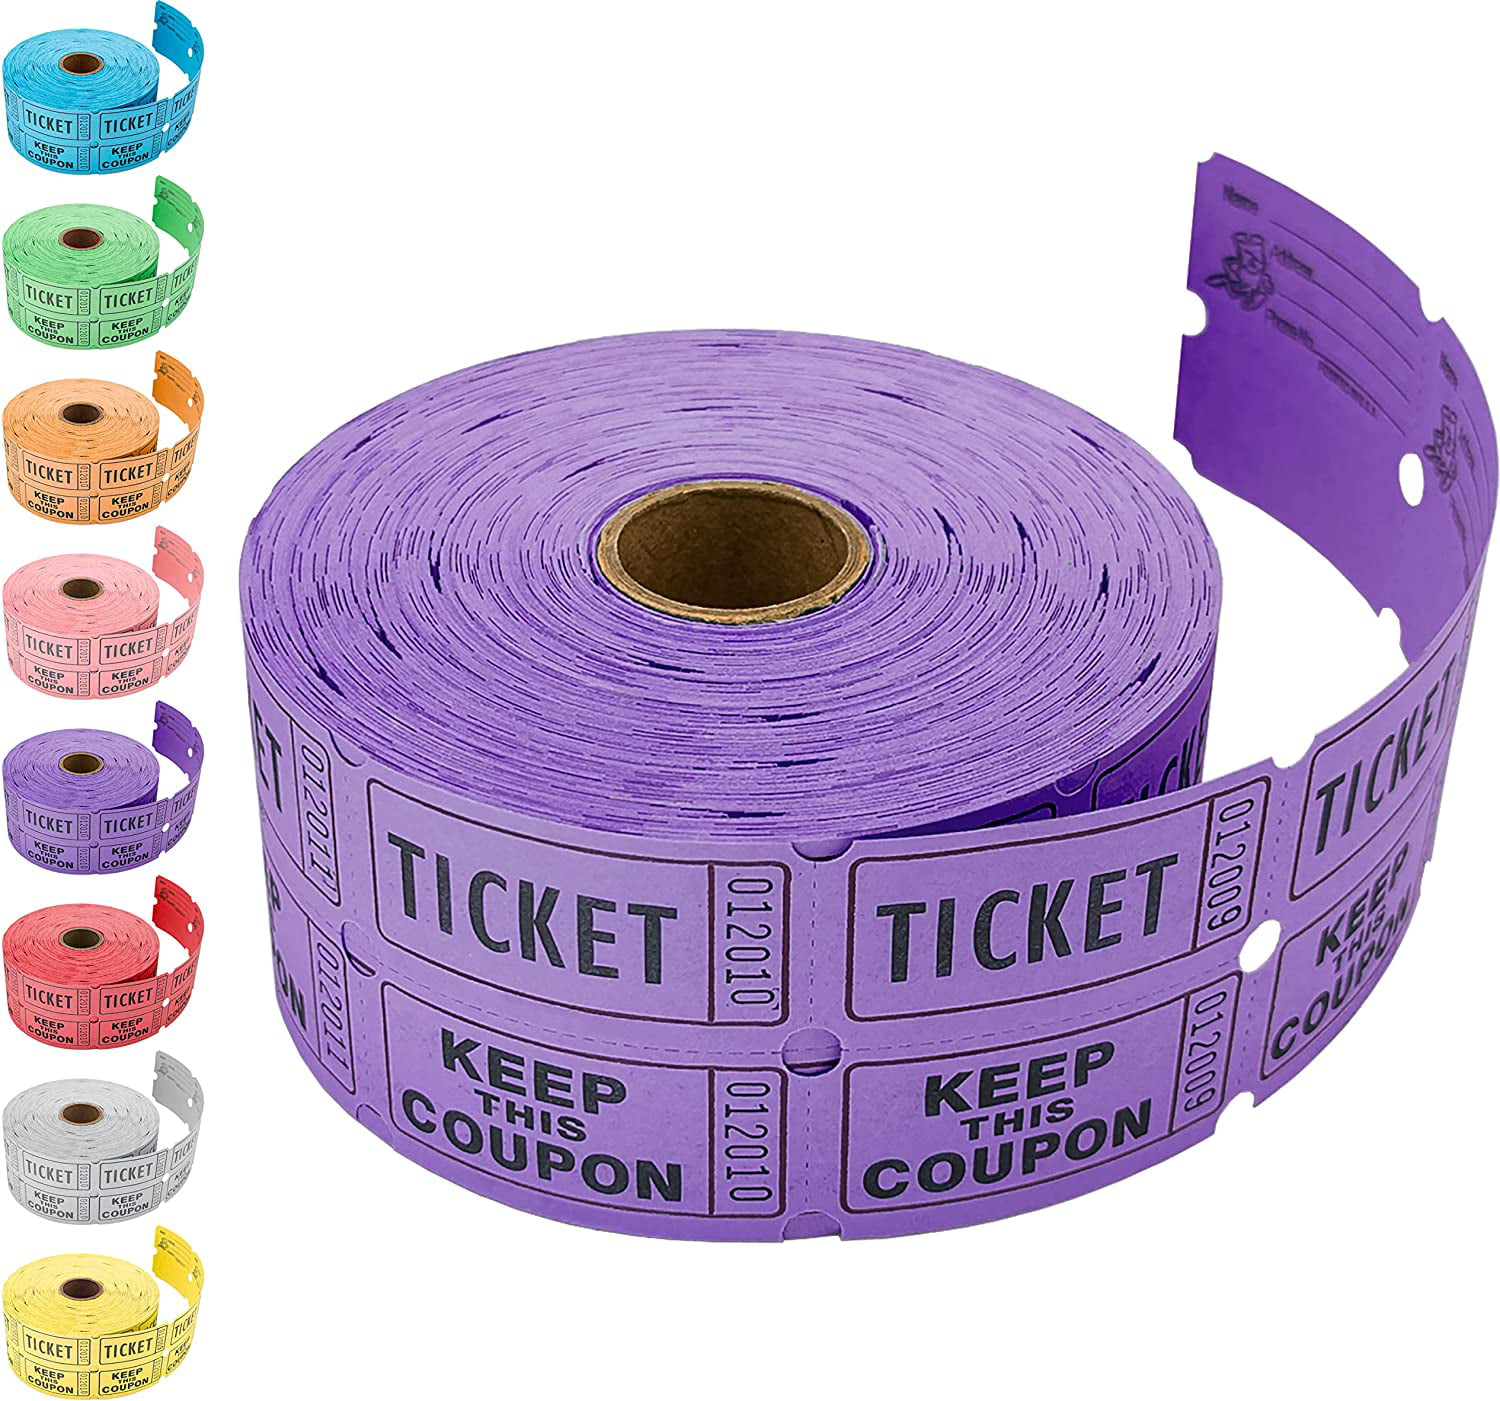 ROLL OF 1000 DOUBLE NUMBER RAFFLE TICKETS 